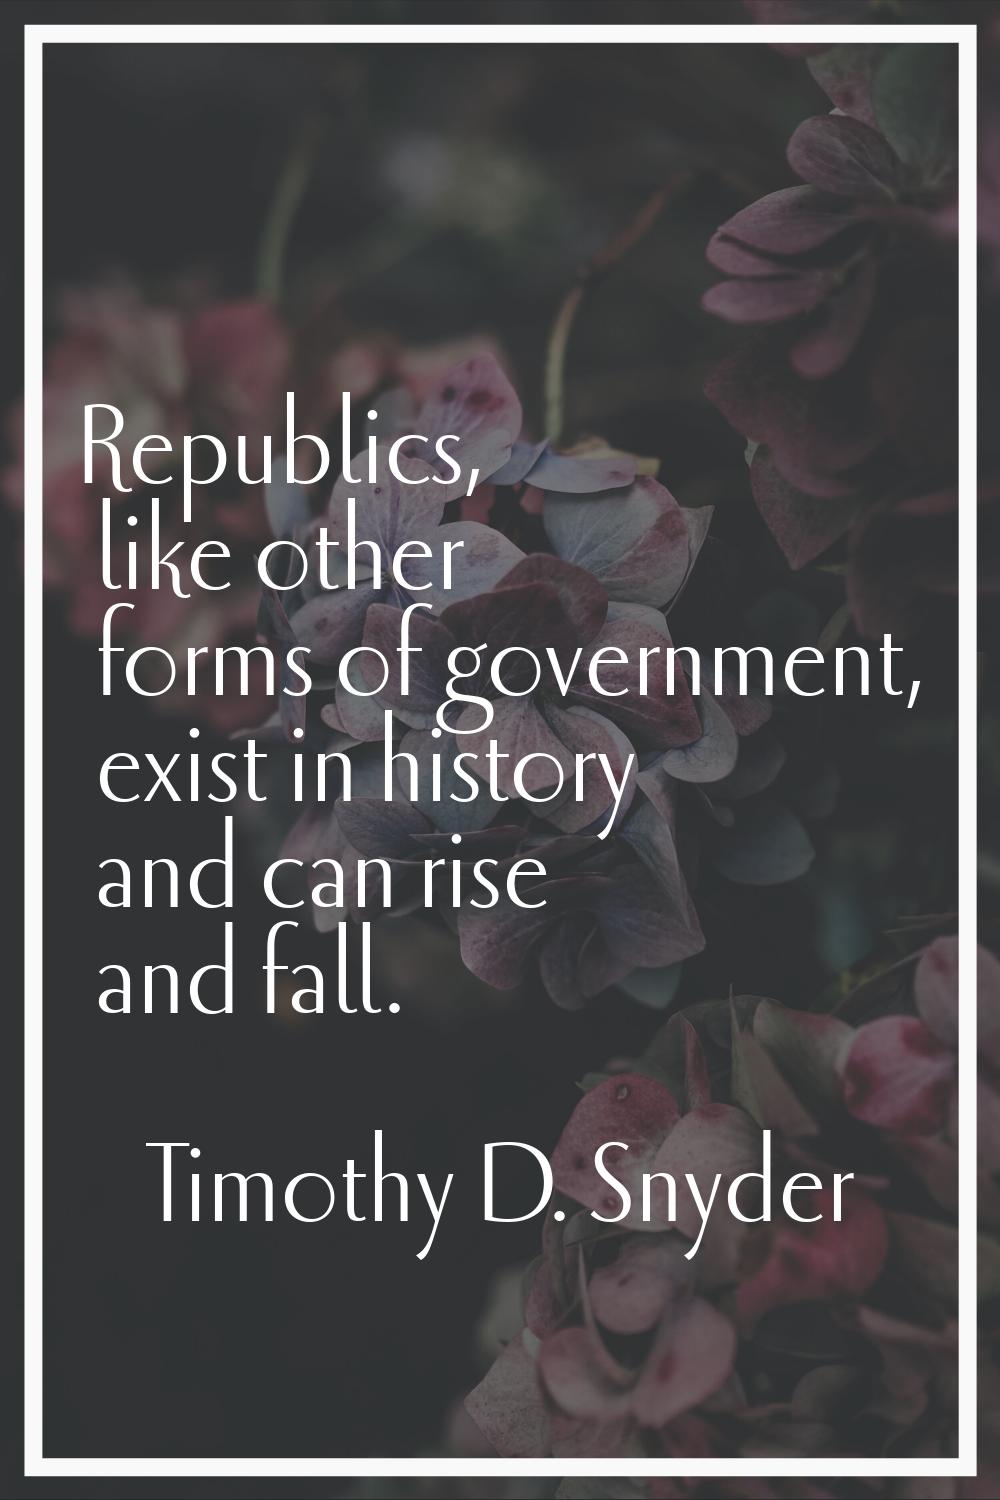 Republics, like other forms of government, exist in history and can rise and fall.